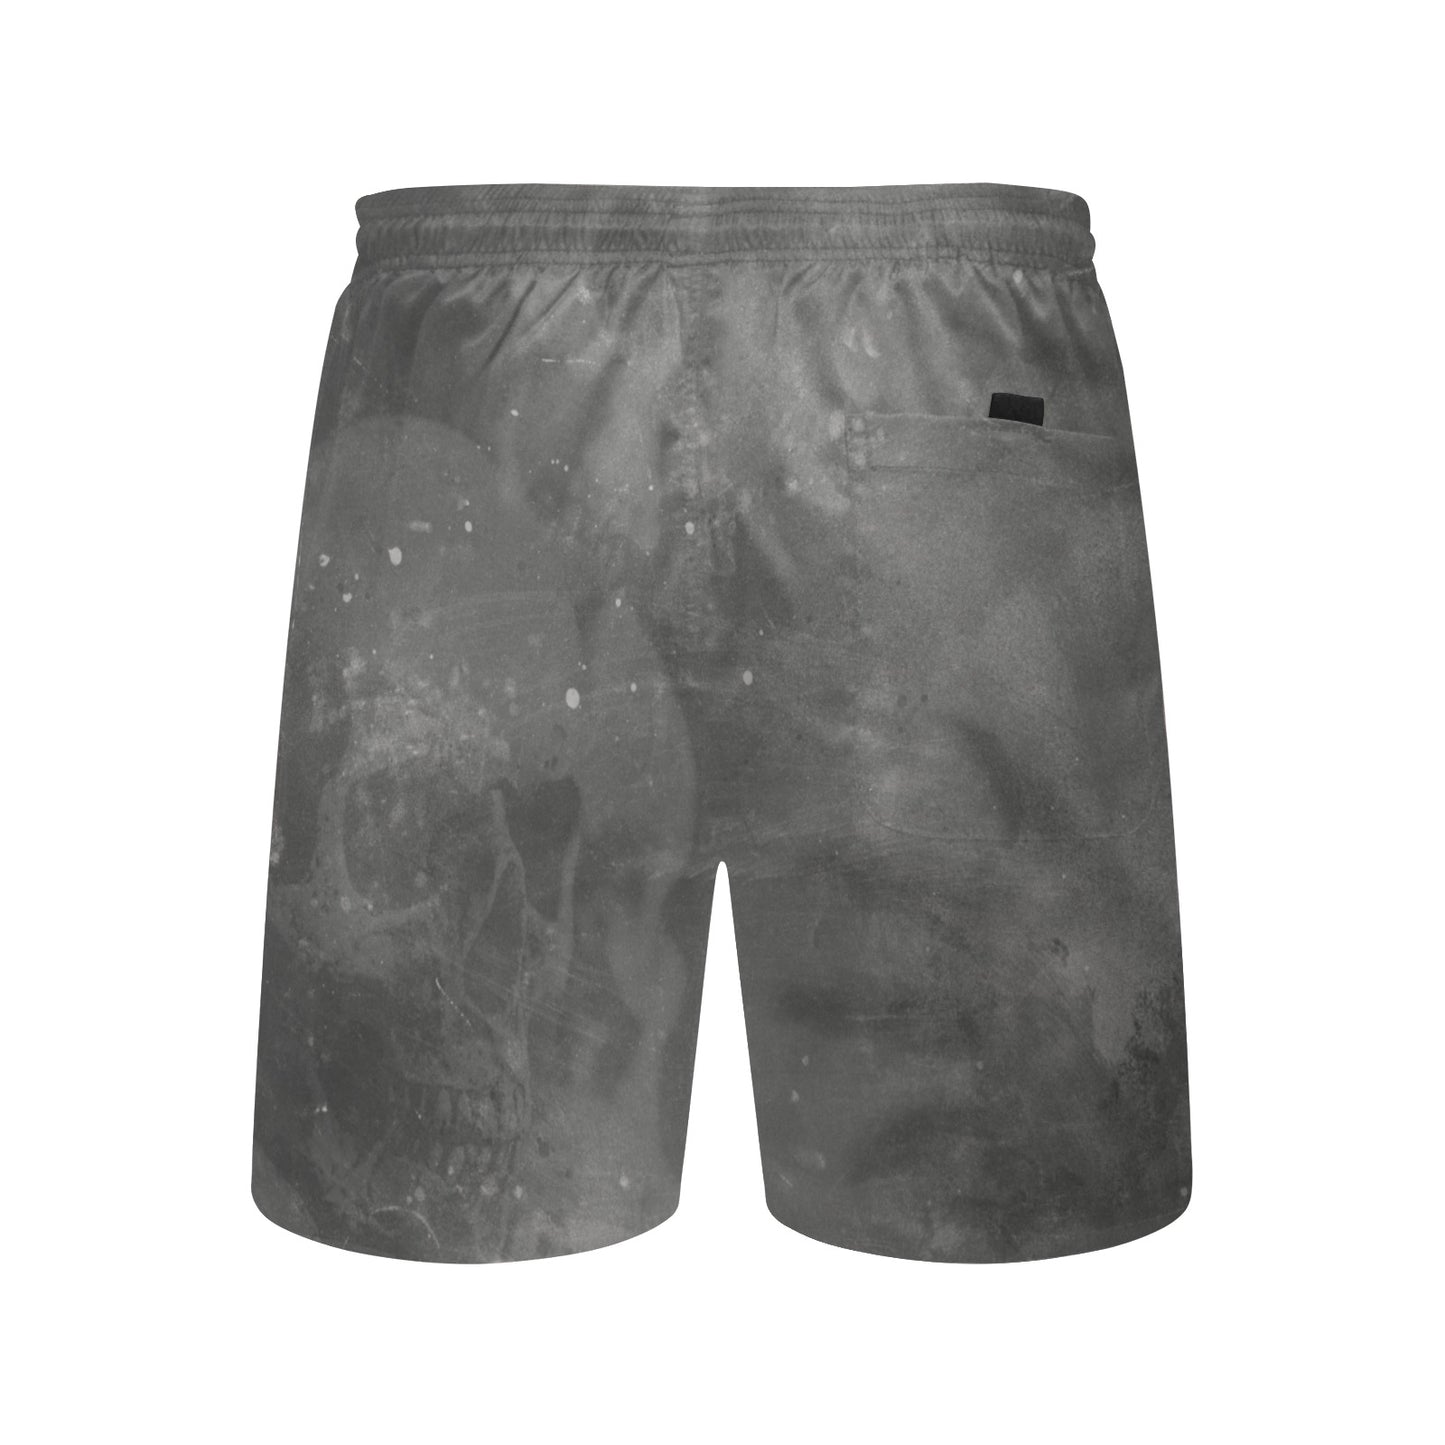 Faded Skull And Hands Beach Shorts